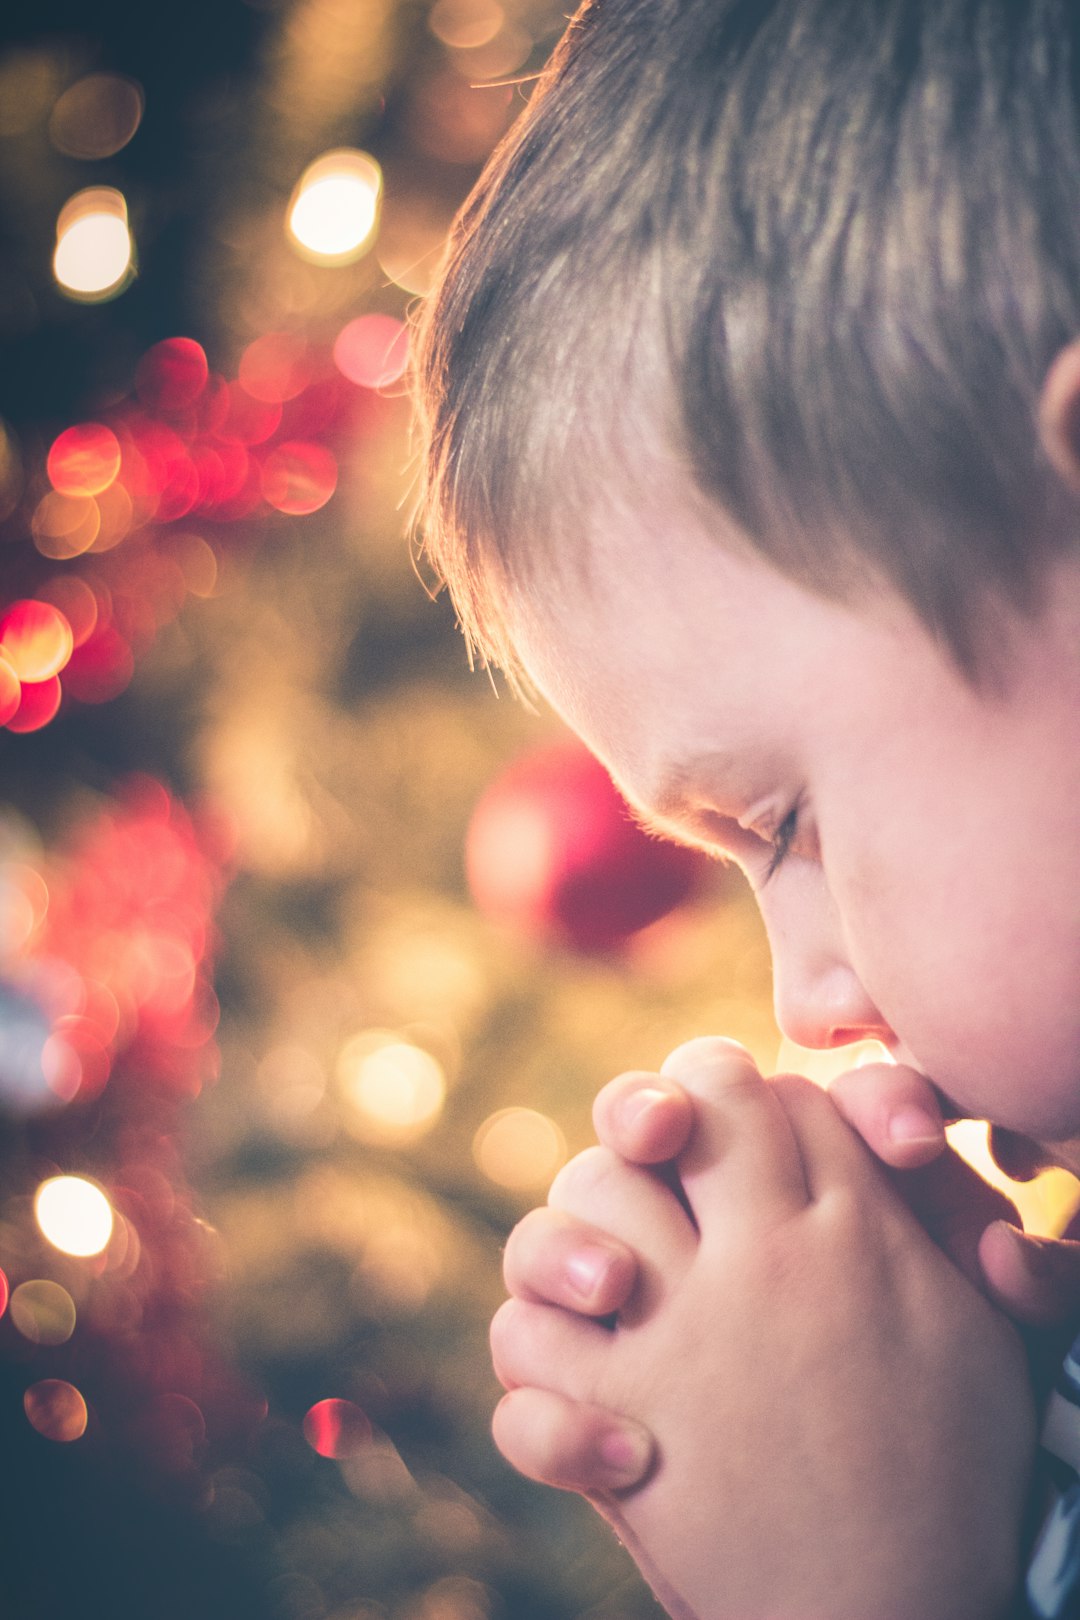 A little boy praying in front of a Christmas tree.